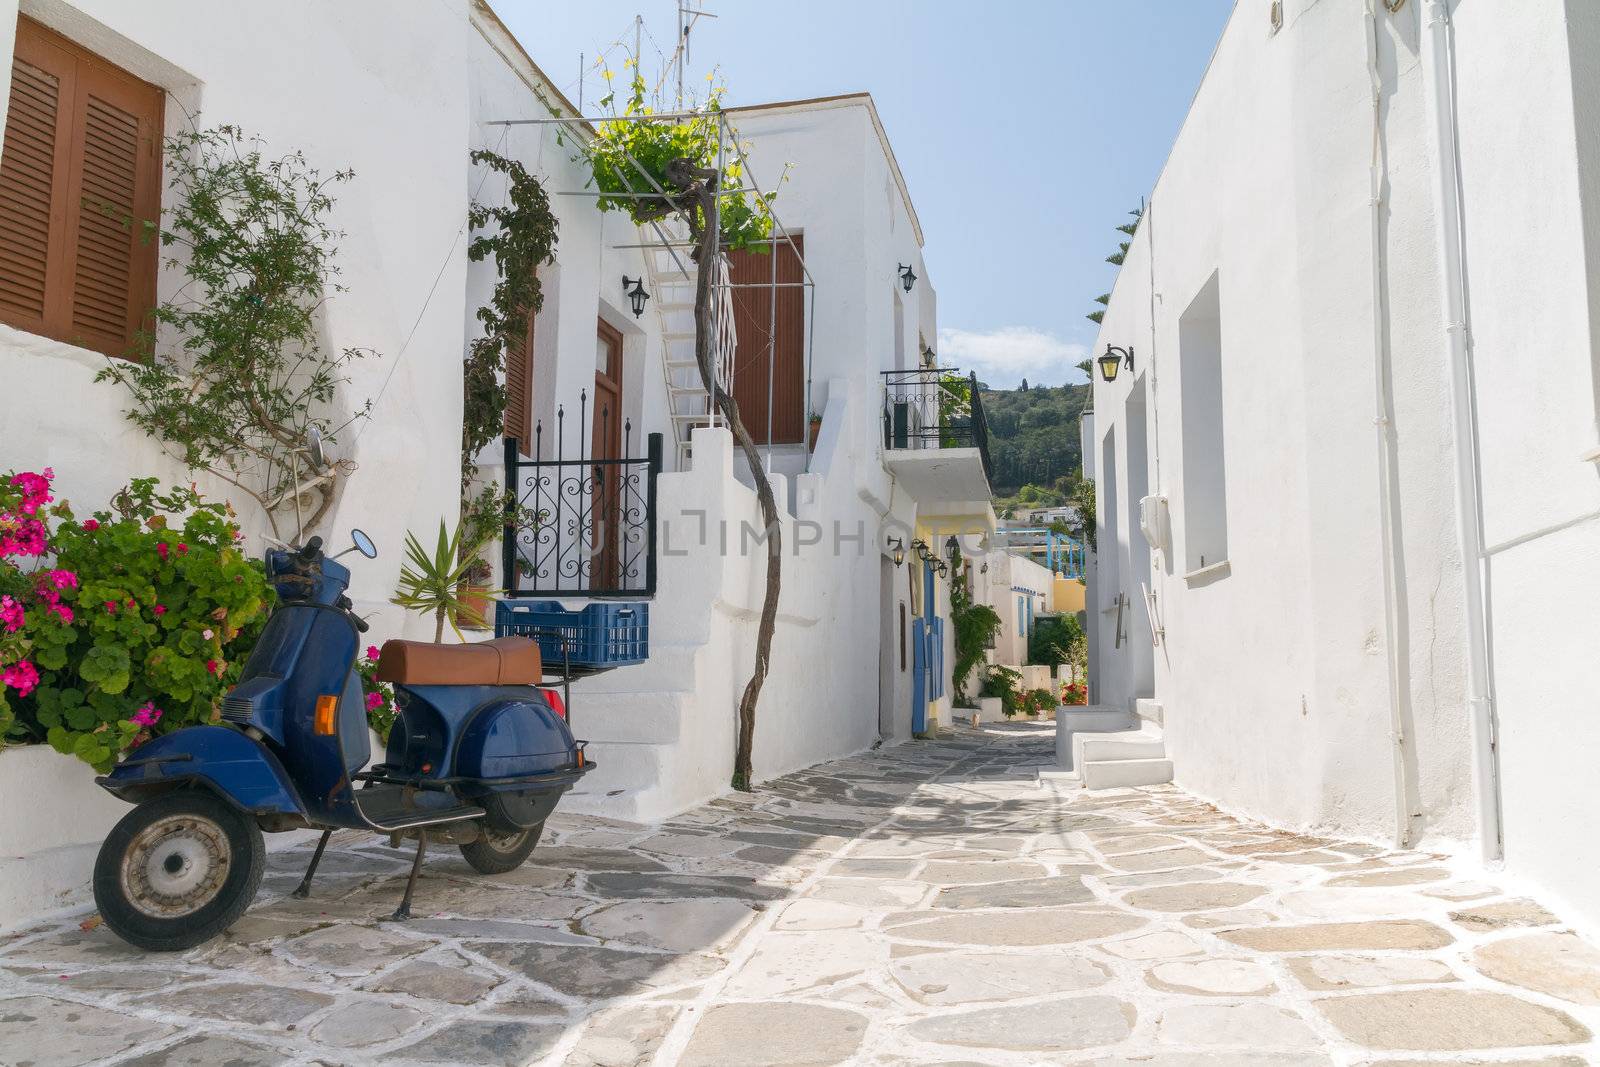 Typical small street in a Greece by chrisroll